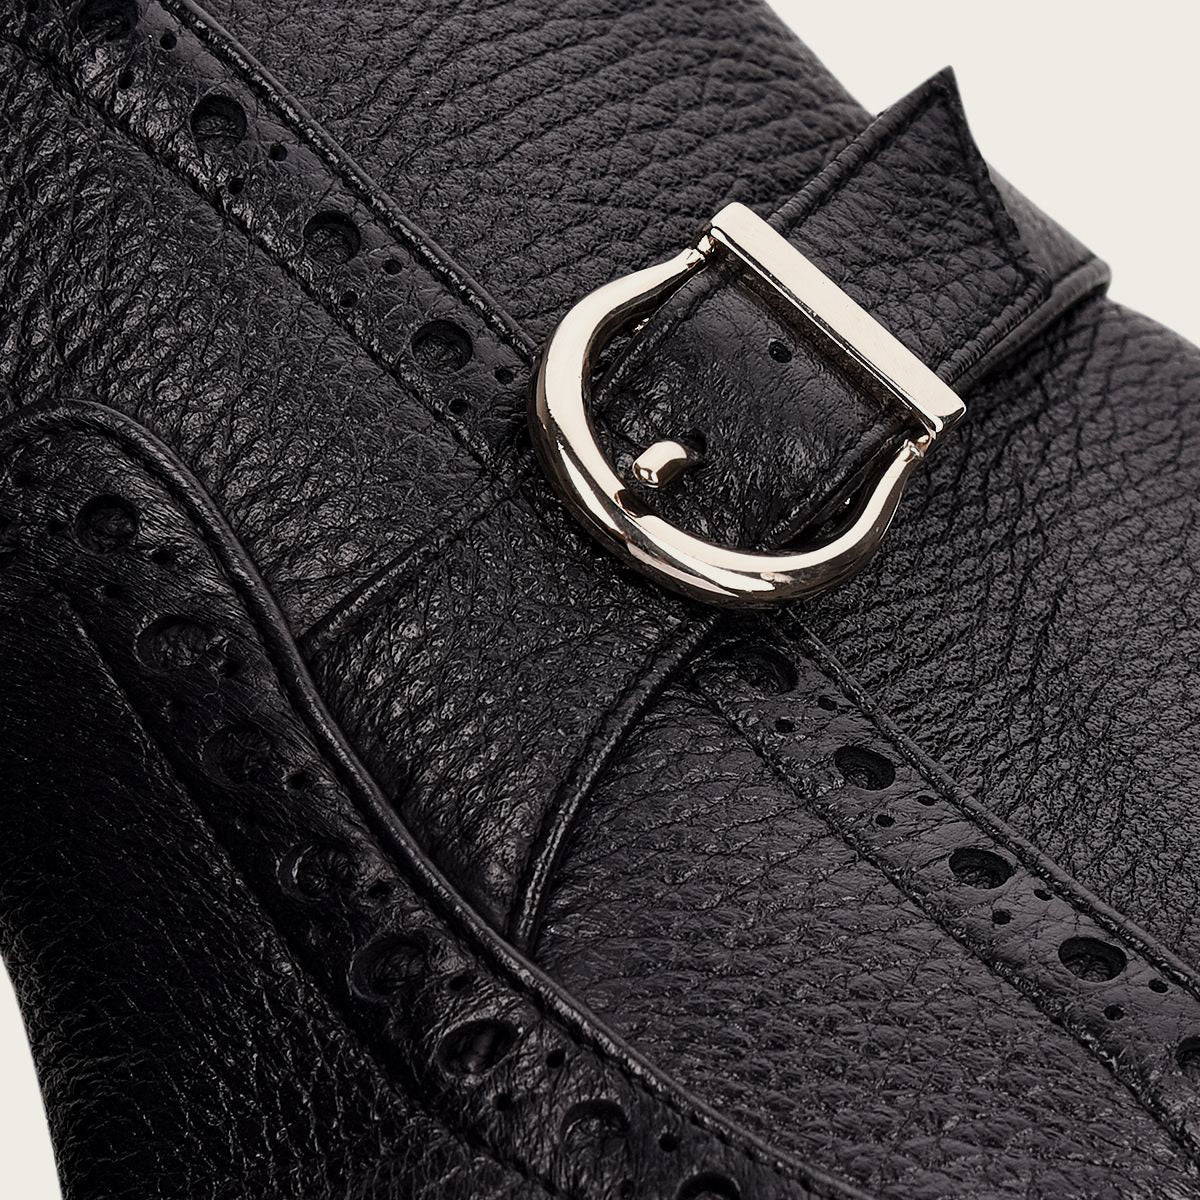 Genuine deer black leather bootie with buckle. Luxurious and stylish. Order now for a chic addition to your wardrobe